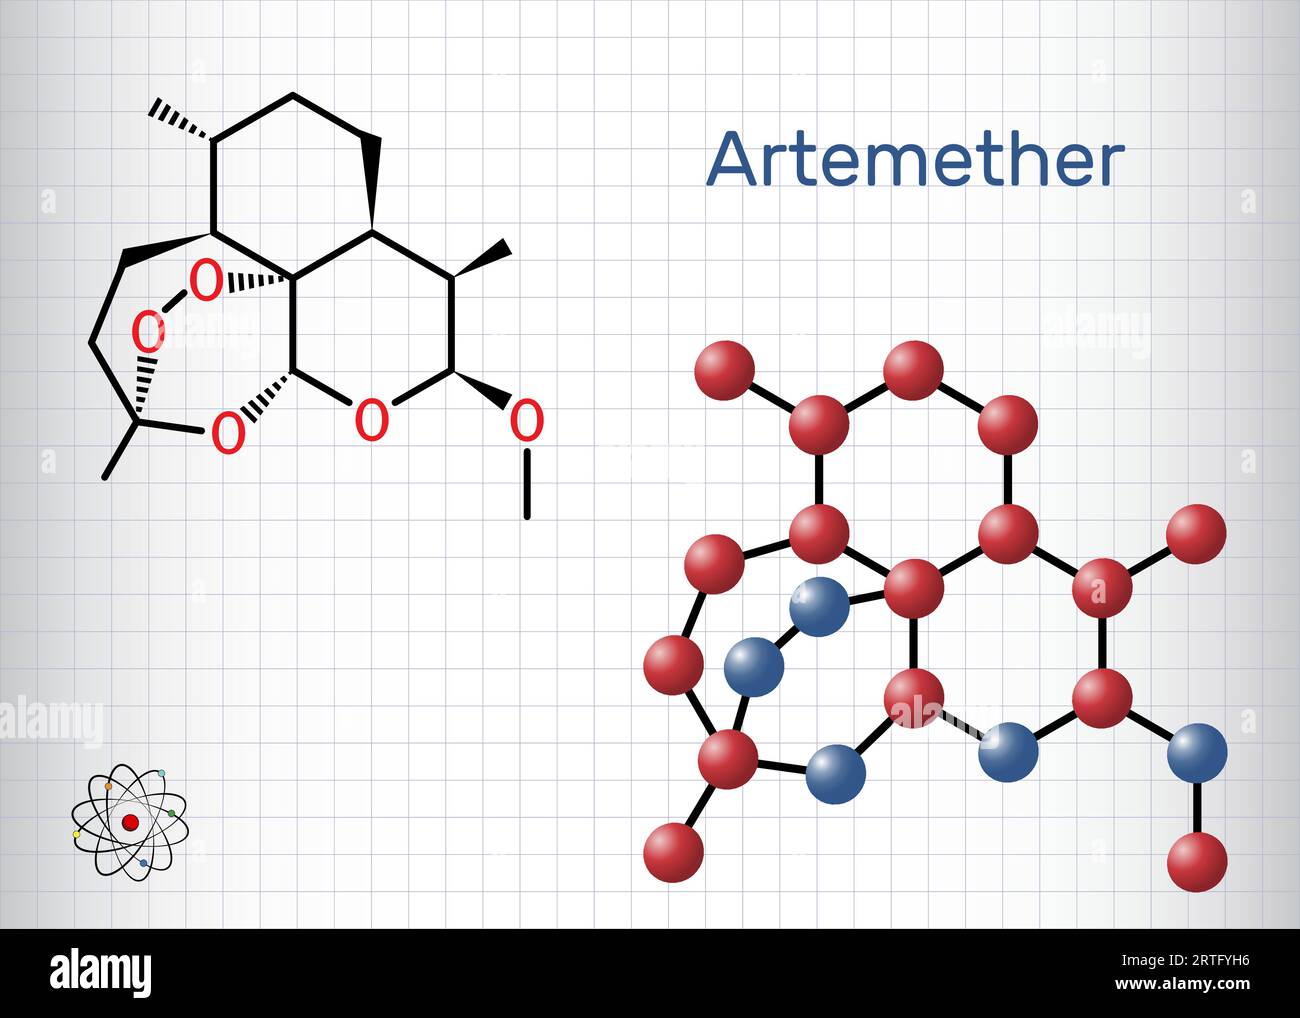 Artemether molecule. It is used for the treatment of malaria. Structural chemical formula and molecule model. Sheet of paper in a cage. Vector illustr Stock Vector